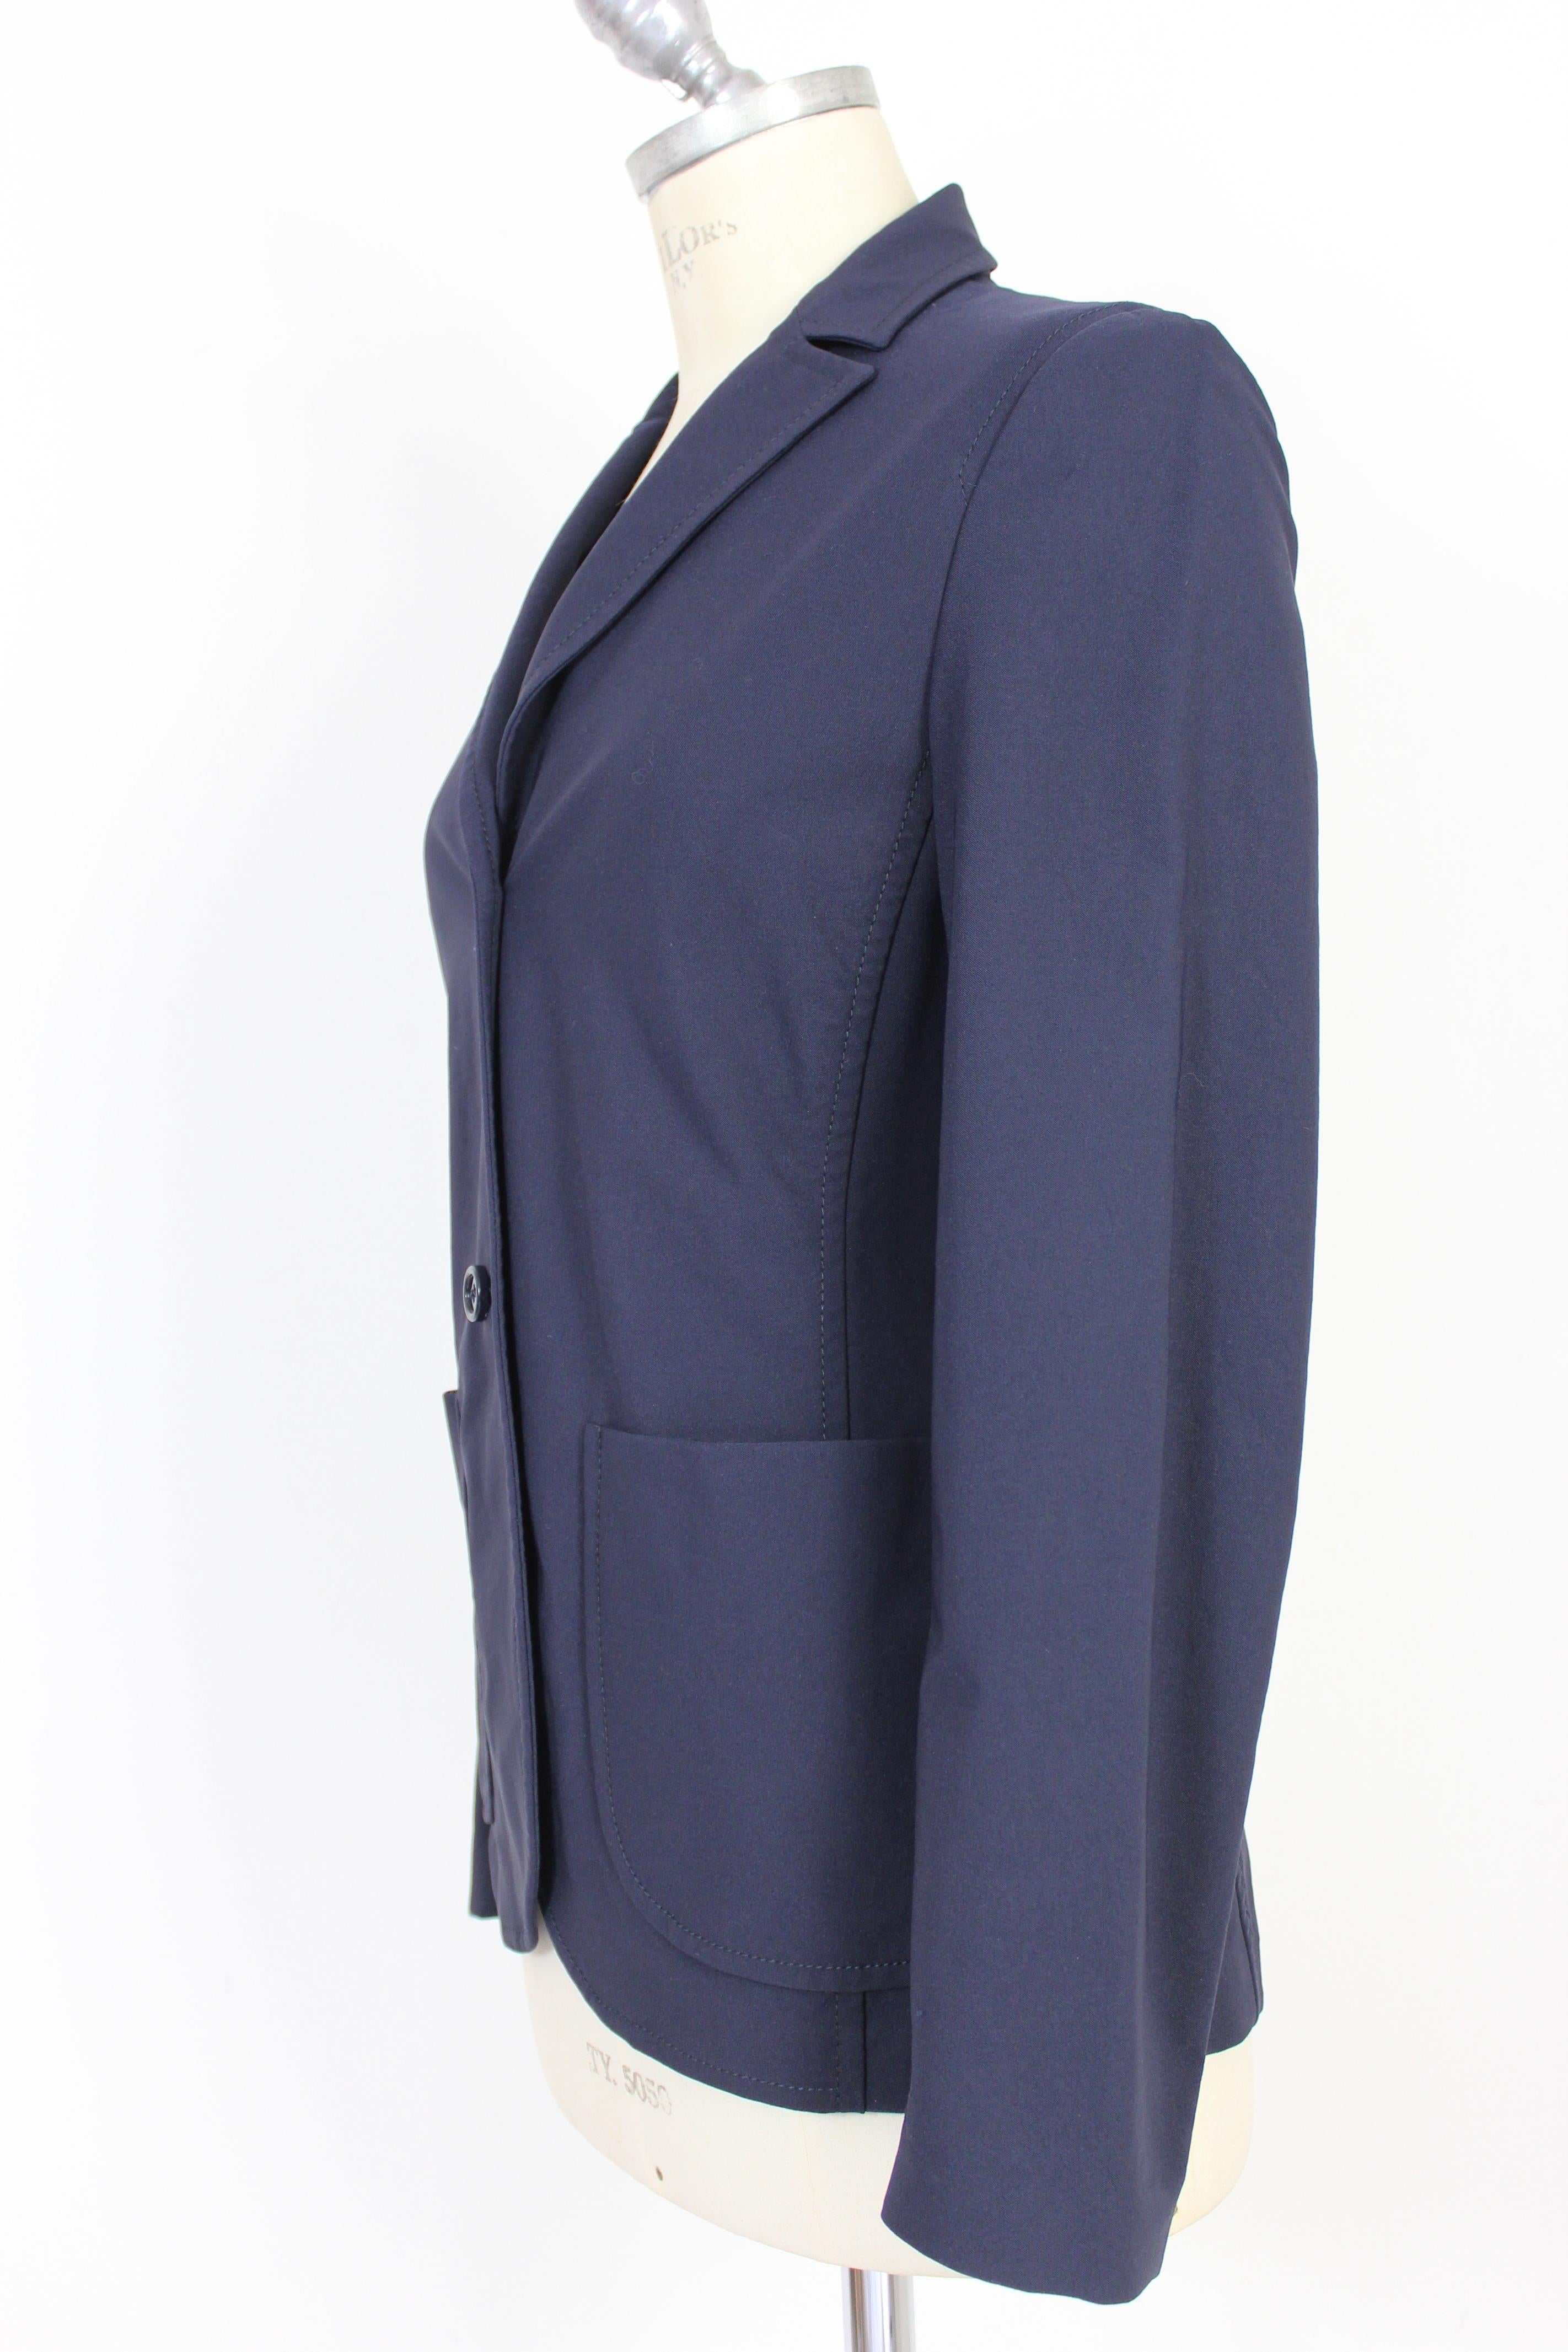 Prada Blue Classic Fitted Jacket In Excellent Condition In Brindisi, Bt